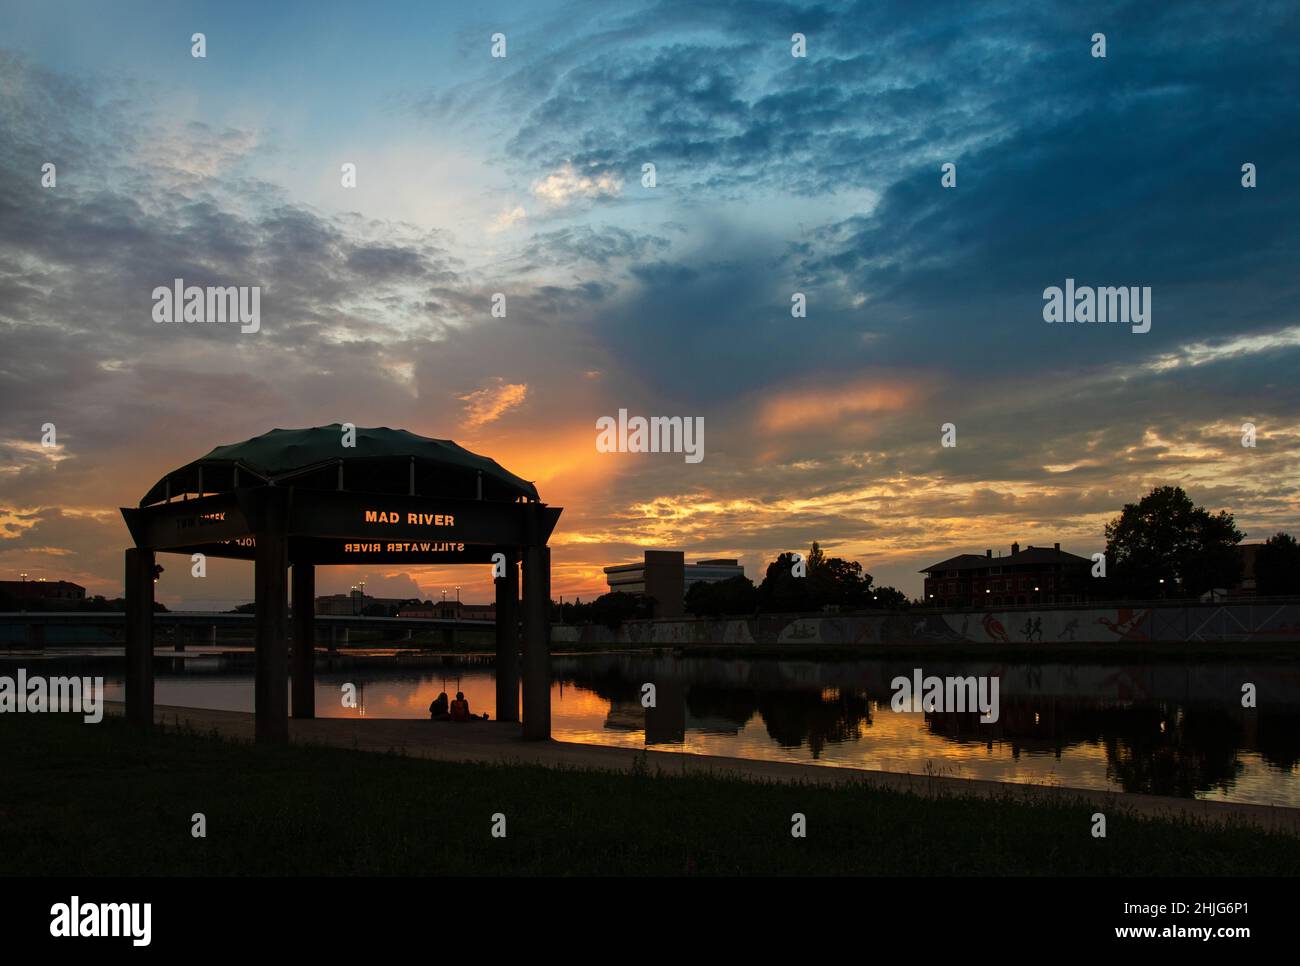 Landmark pavilion, with two people seated, at the confluence of the Mad River and Miami River Riverscape. Sunset sky is in the background. Riverscape Stock Photo